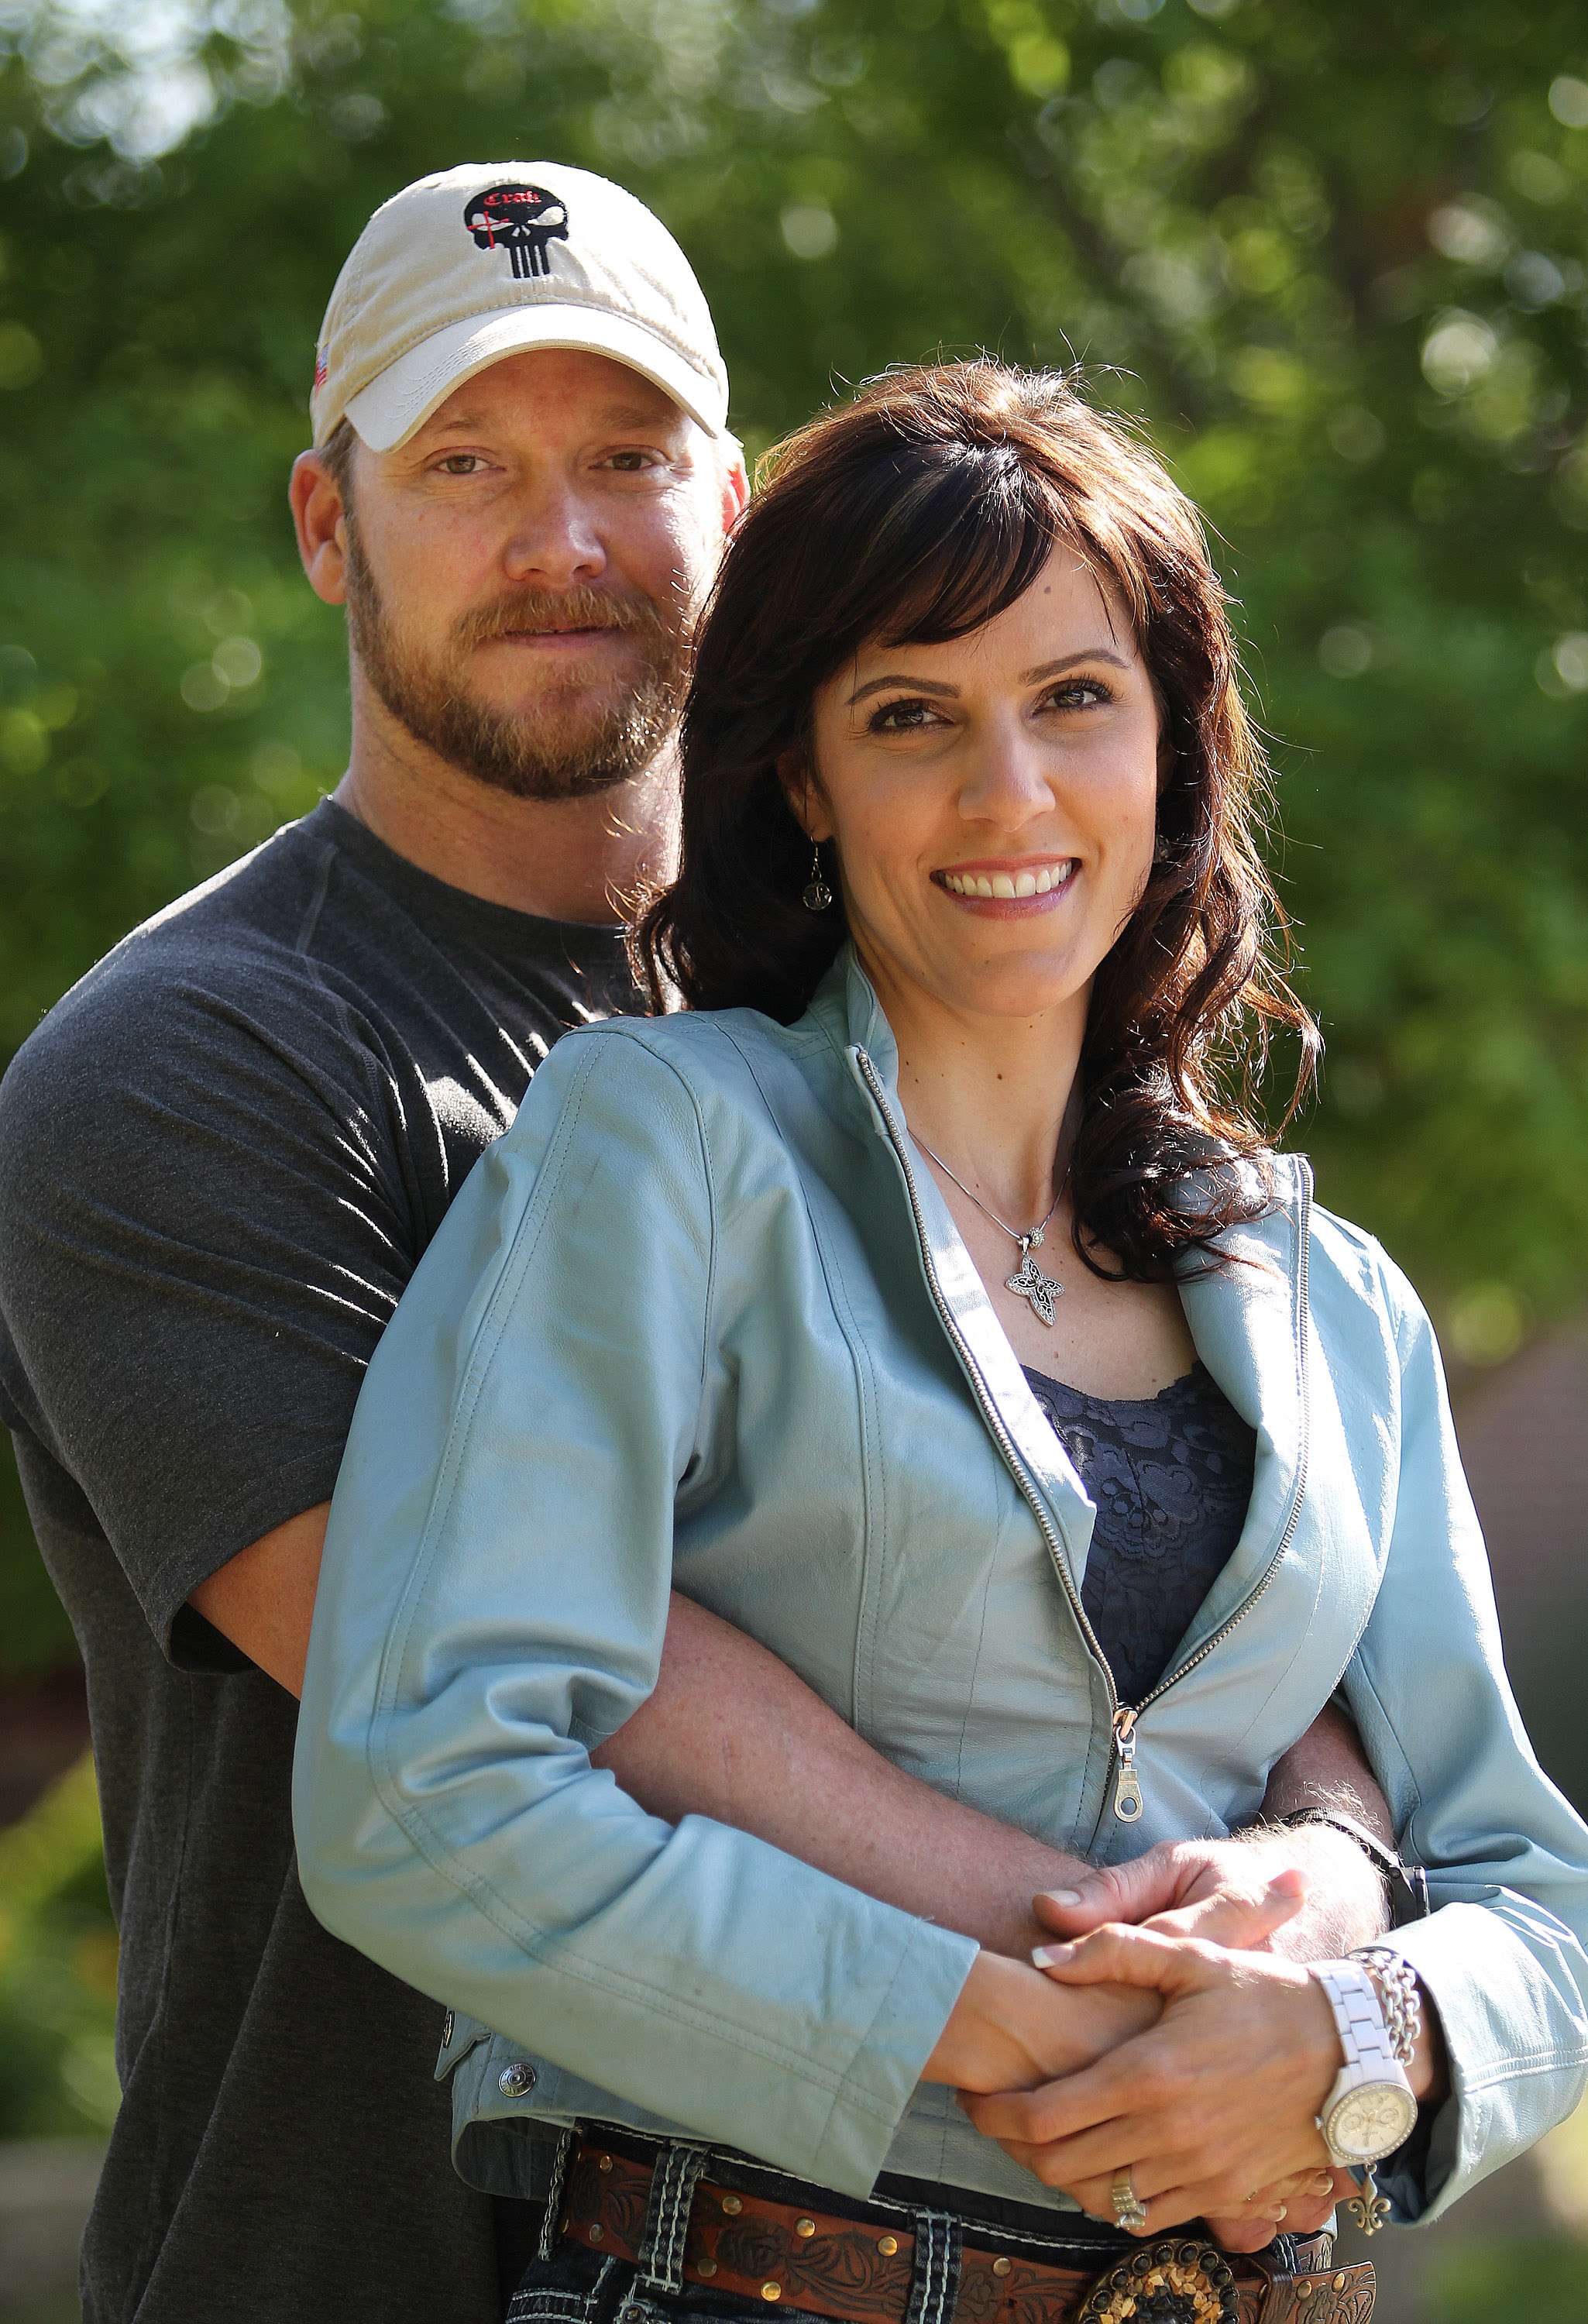 Chris Kyle, a retired Navy SEAL and bestselling author of the book "American Sniper: The Autobiography of the Most Lethal Sniper in U.S. Military History," is seen with his wife, Taya, April 6, 2012. (Fort Worth Star-Telegram&mdash;MCT via Getty Images)